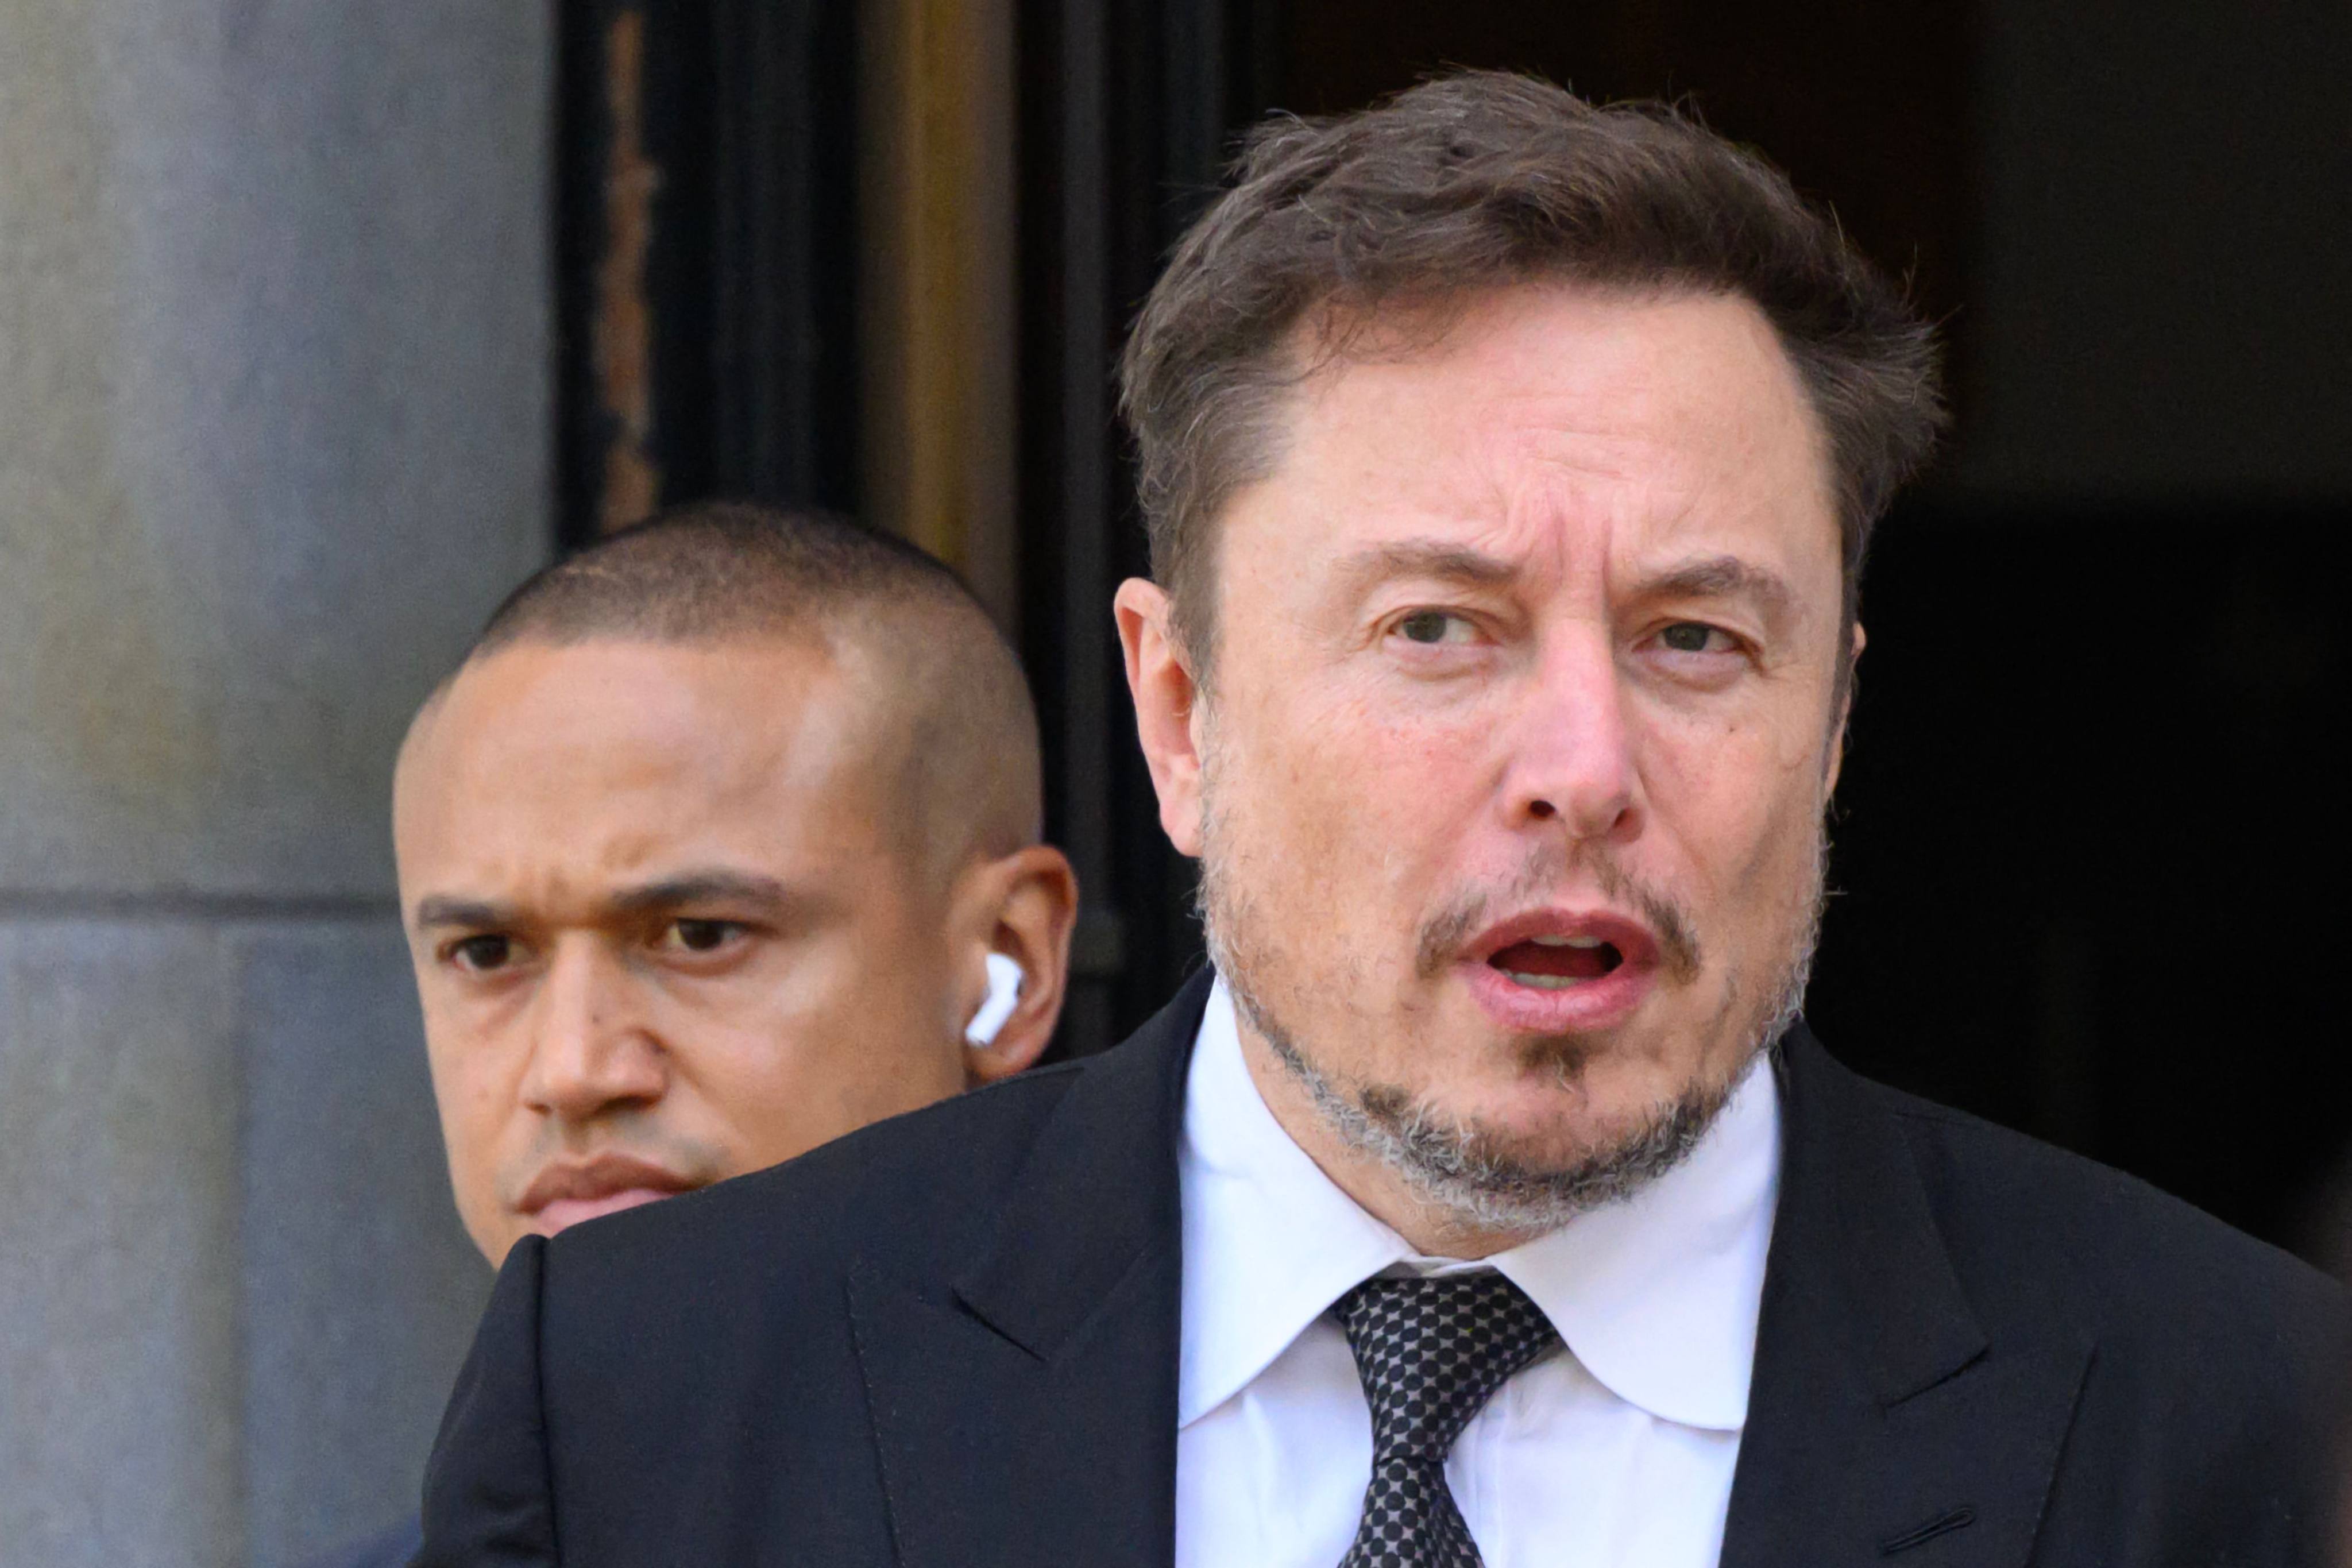 X (formerly Twitter) CEO Elon Musk leaves an Artificial Intelligence forum in Washington on Wednesday. Photo: AFP